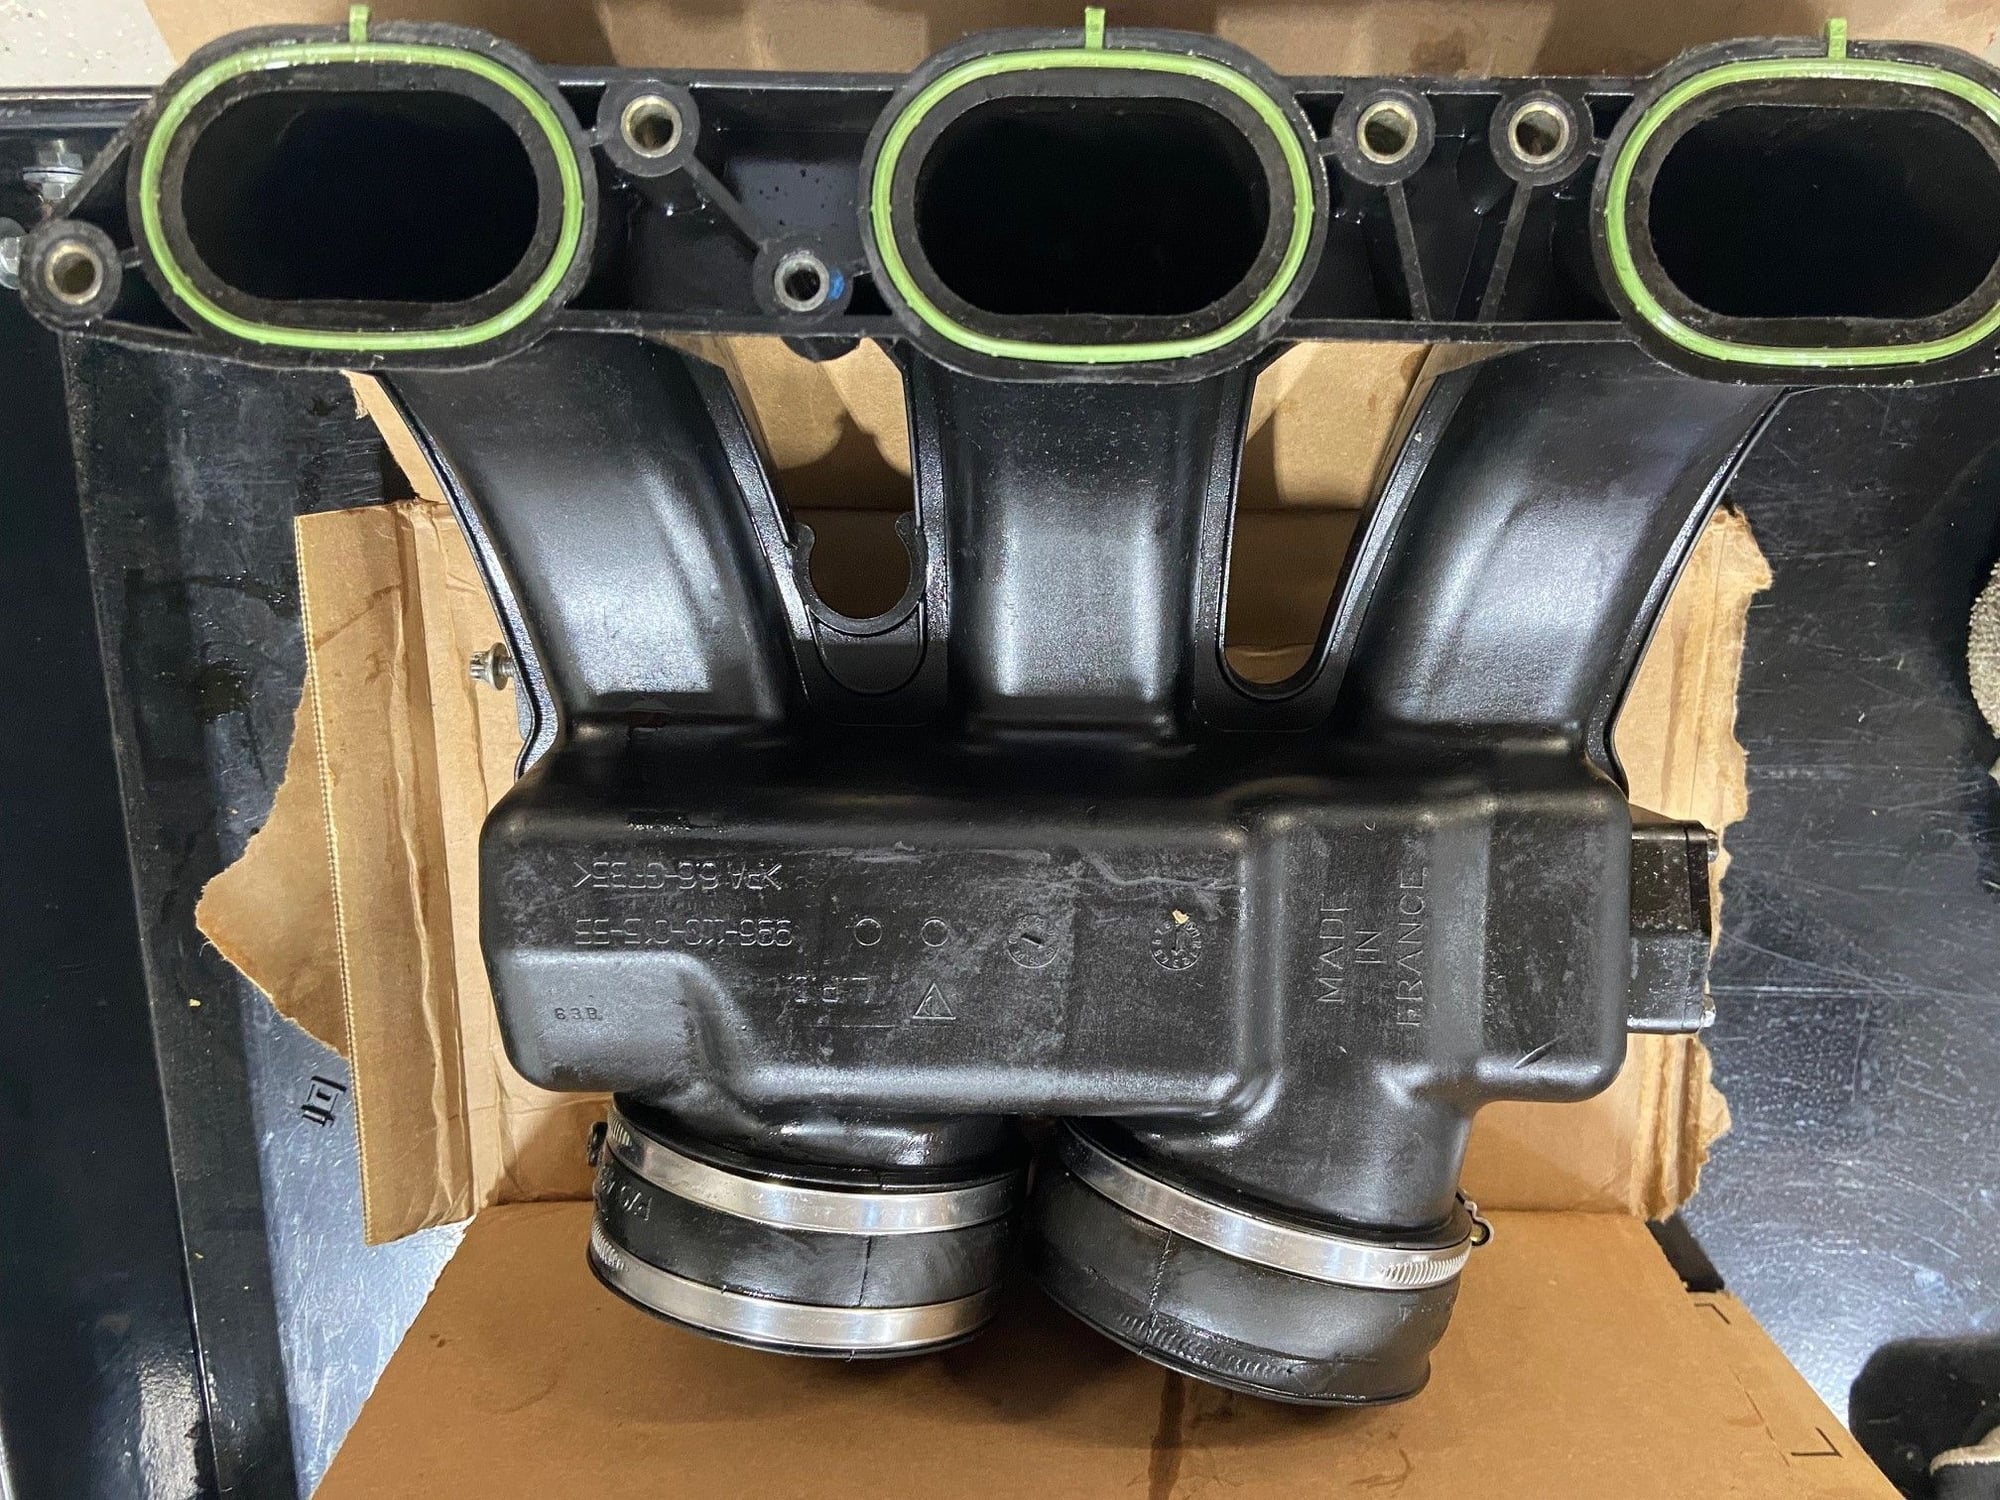 Engine - Intake/Fuel - 996 Intake Plenum, MAF and Cold Air Intake Pipes - Used - 1997 to 2001 Porsche 911 - Pittsford, NY 14534, United States